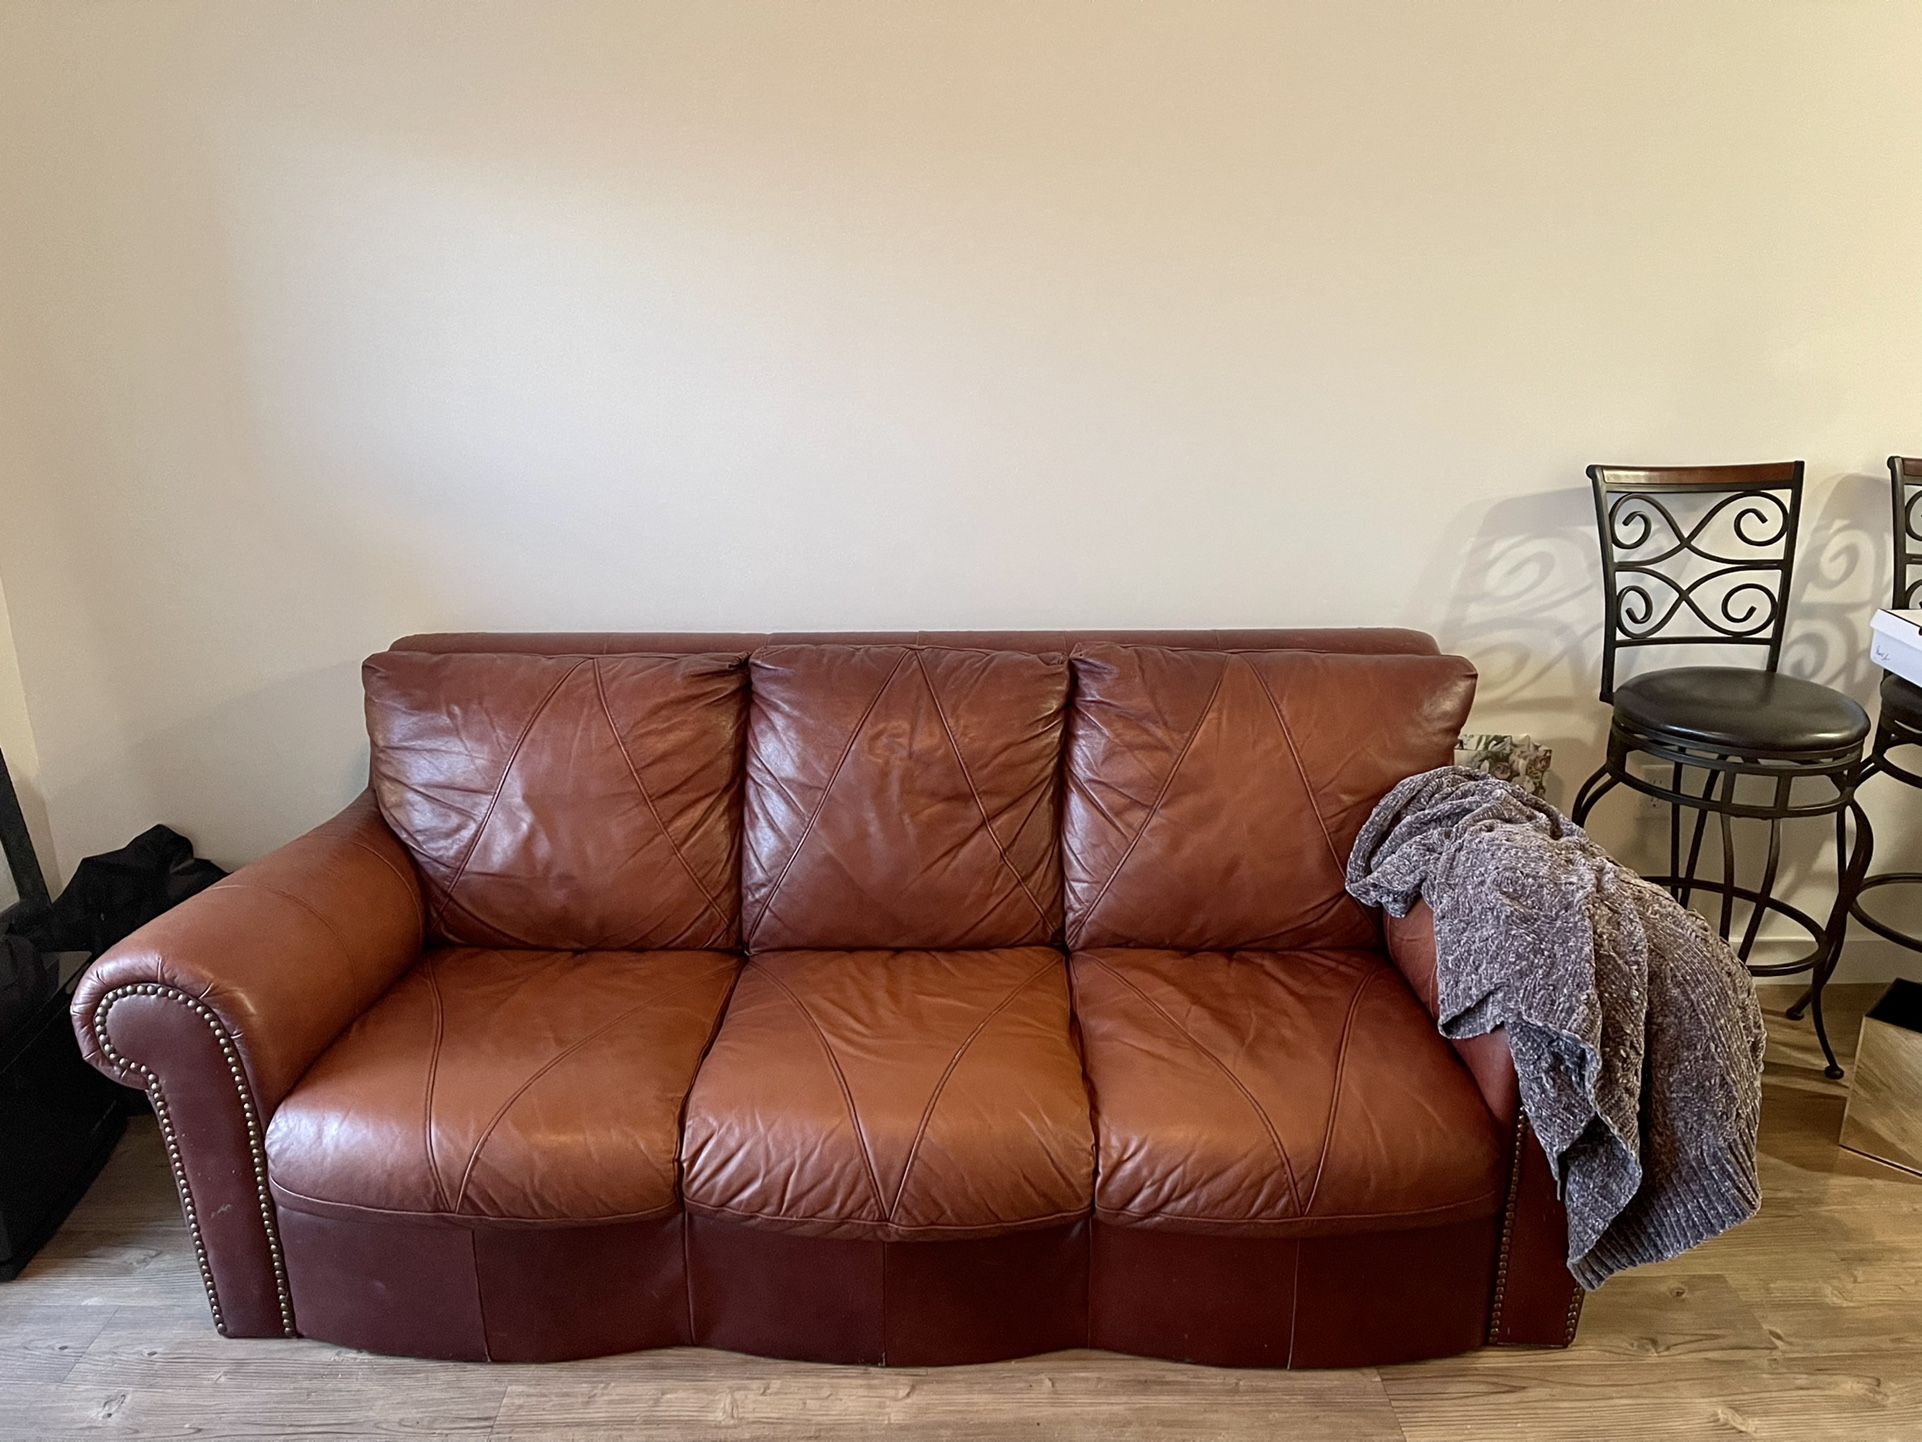 Leather Couch $90 Has Scratches 